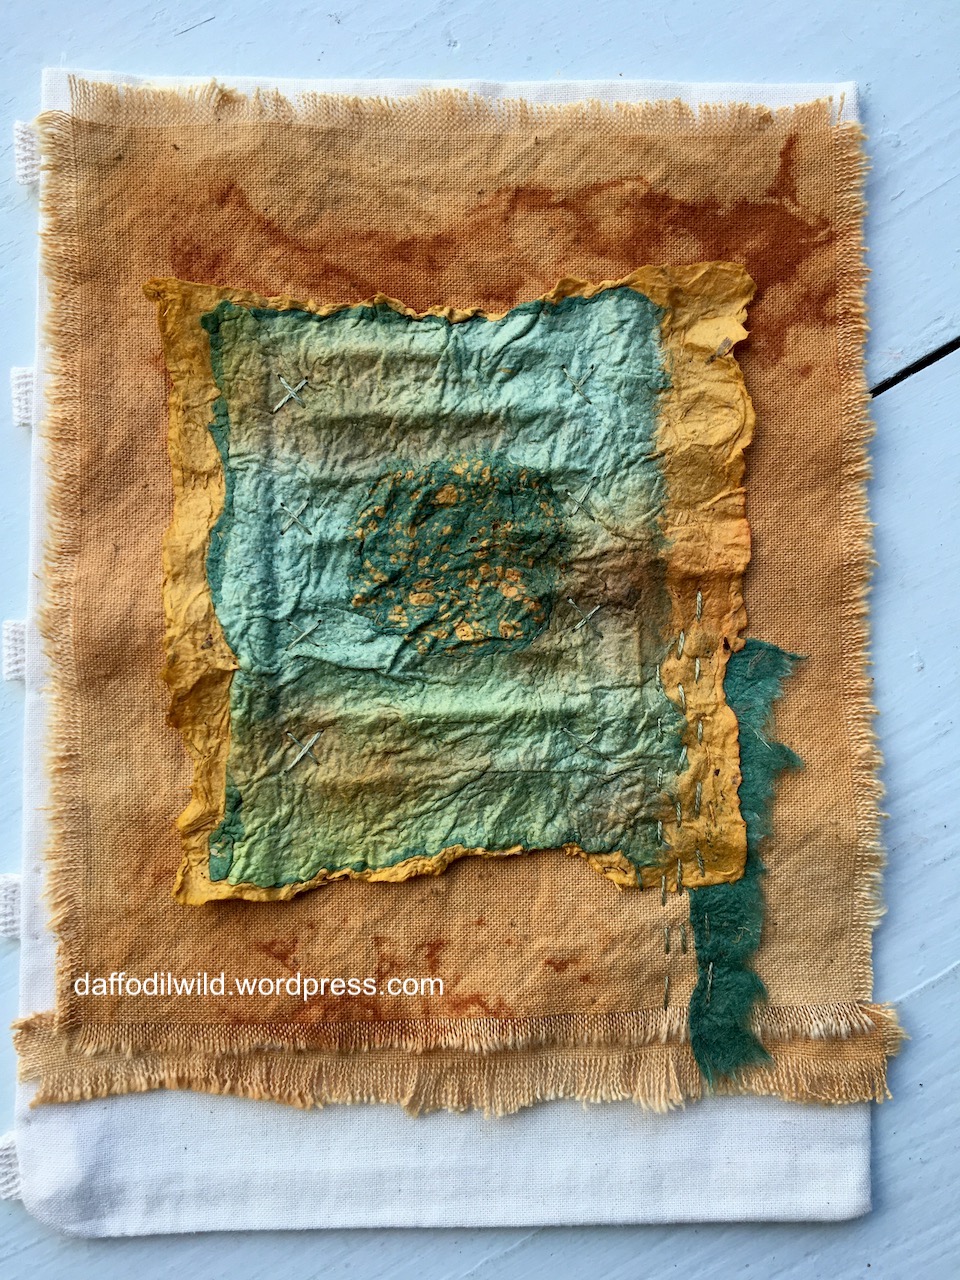 rust dyed fabric and joomchi, textile art